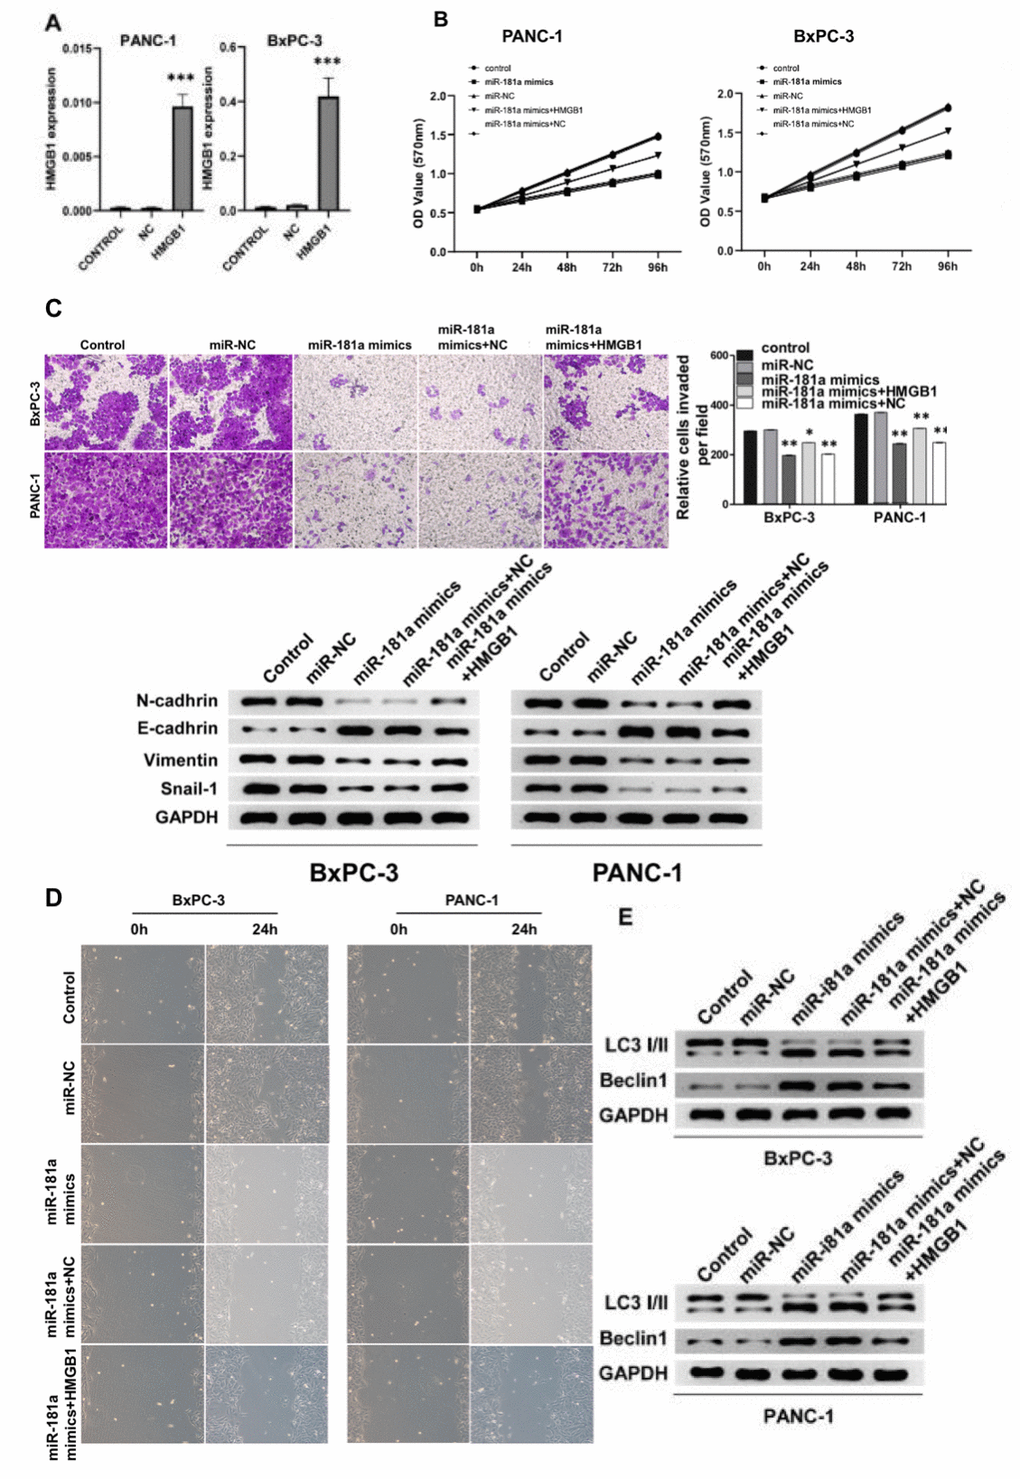 miR-181a inhibited pancreatic cancer cell viability by promoting autophagy of pancreatic cancer cells in vitro. (A) qRT-PCR detected the overexpression efficiency of HMGB1 in PANC-1 cells and BxPC-3 cells. (B) The cell proliferation of pancreatic cancer cells transfected with miR-NC, miR-181a mimics, miR-181a mimics+HMGB1, miR-181a mimics+NC was determined by MTT experiments due to their respective OD value. (C) Top: The transwell experiment suggested the effects of miR-181a and HMGB1 on invasion of PANC-1 cells and BxPC-3 cells, respectively. Bottom: The protein expression of N-cadherin, E-cadherin, Vimentin, and Snail-1 reflected the invasion ability of PANC-1 cells and BxPC-3 cells. (D) The scratch experiments suggested miR-181a inhibited the healing ability of PANC-1 cells and BxPC-3 cells, however, HMGB1 reversed this effect. (E) LC3 I/II and Beclin1 demonstrated the regulation of autophagy of PANC-1 cells and BxPC-3 cells by miR-181a and HMGB1. GAPDH was set as the internal control. *P **P ***P 